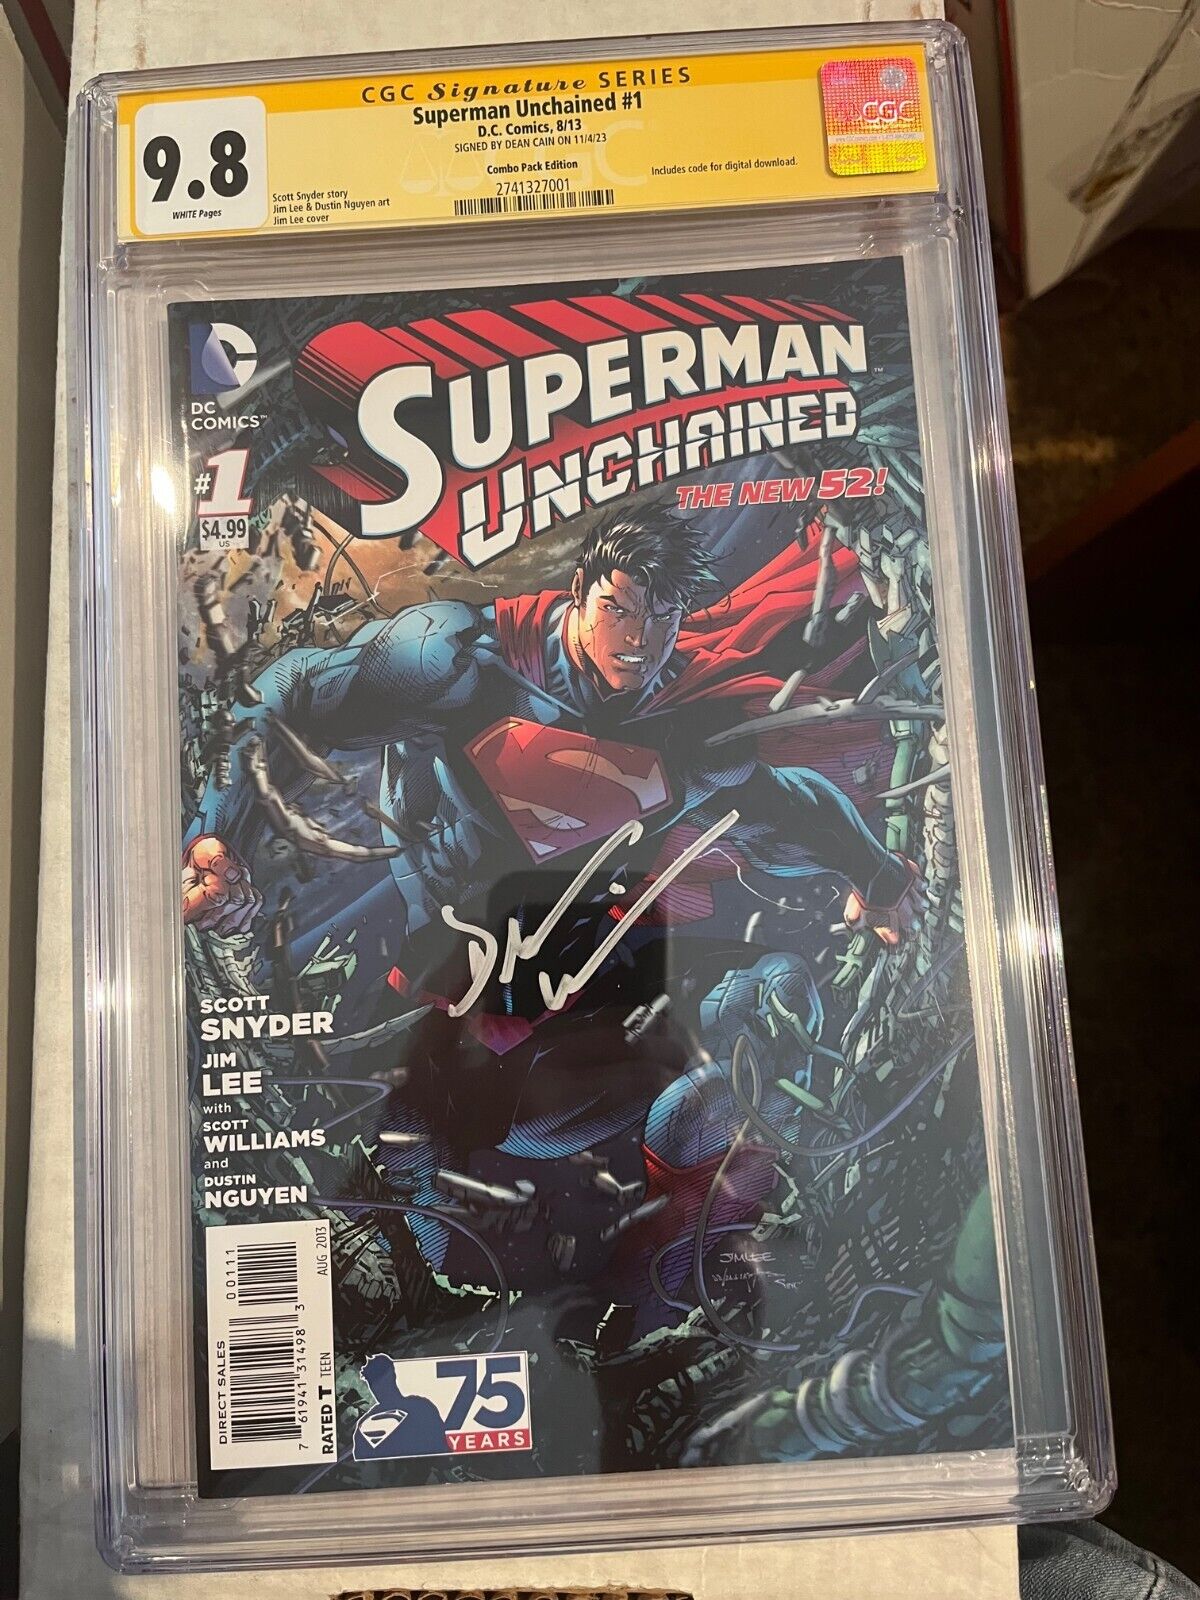 Superman Unchained #1 CGC 9.8 NM/MT, Combo Pack, Jim Lee, SS signed by Dean Cain